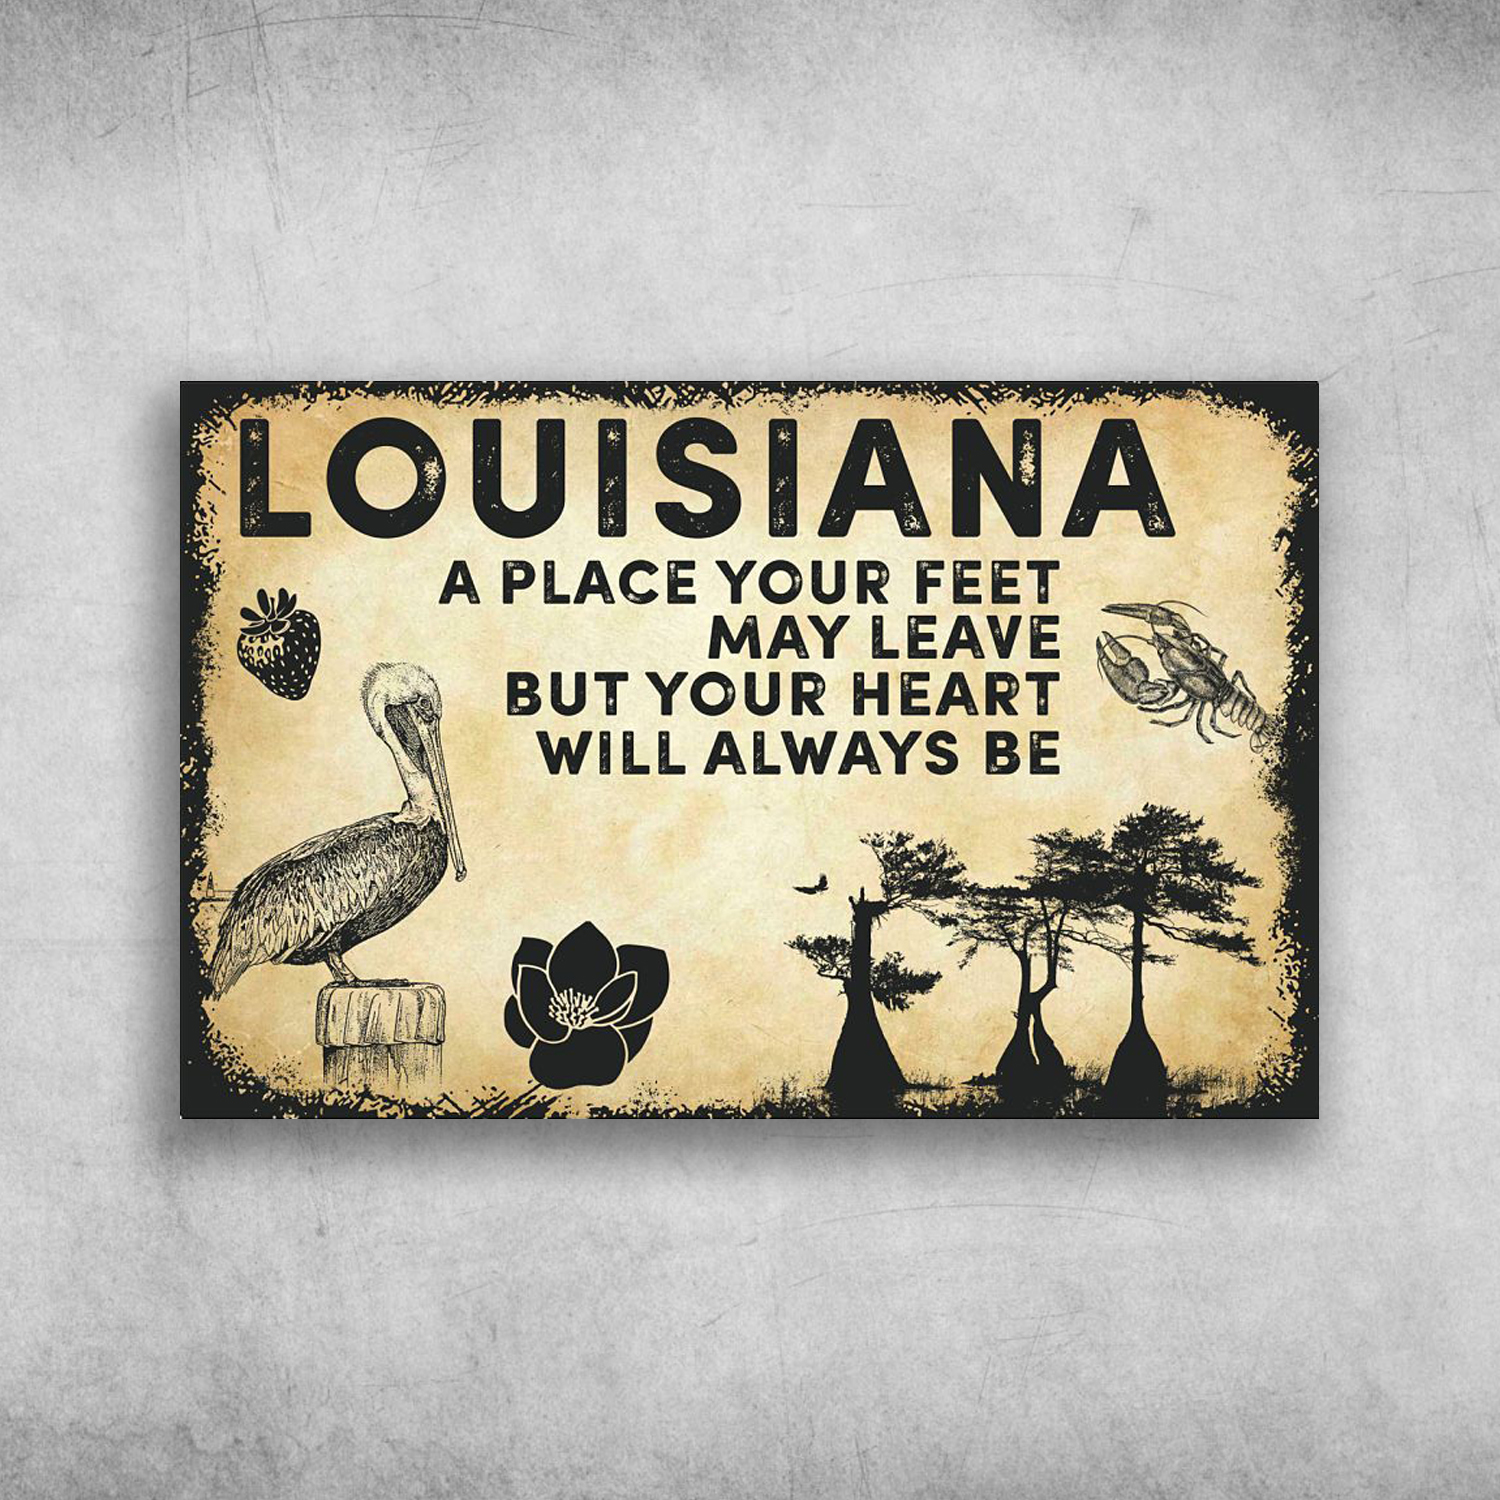 Louisiana America A Place Your Feet May Leave